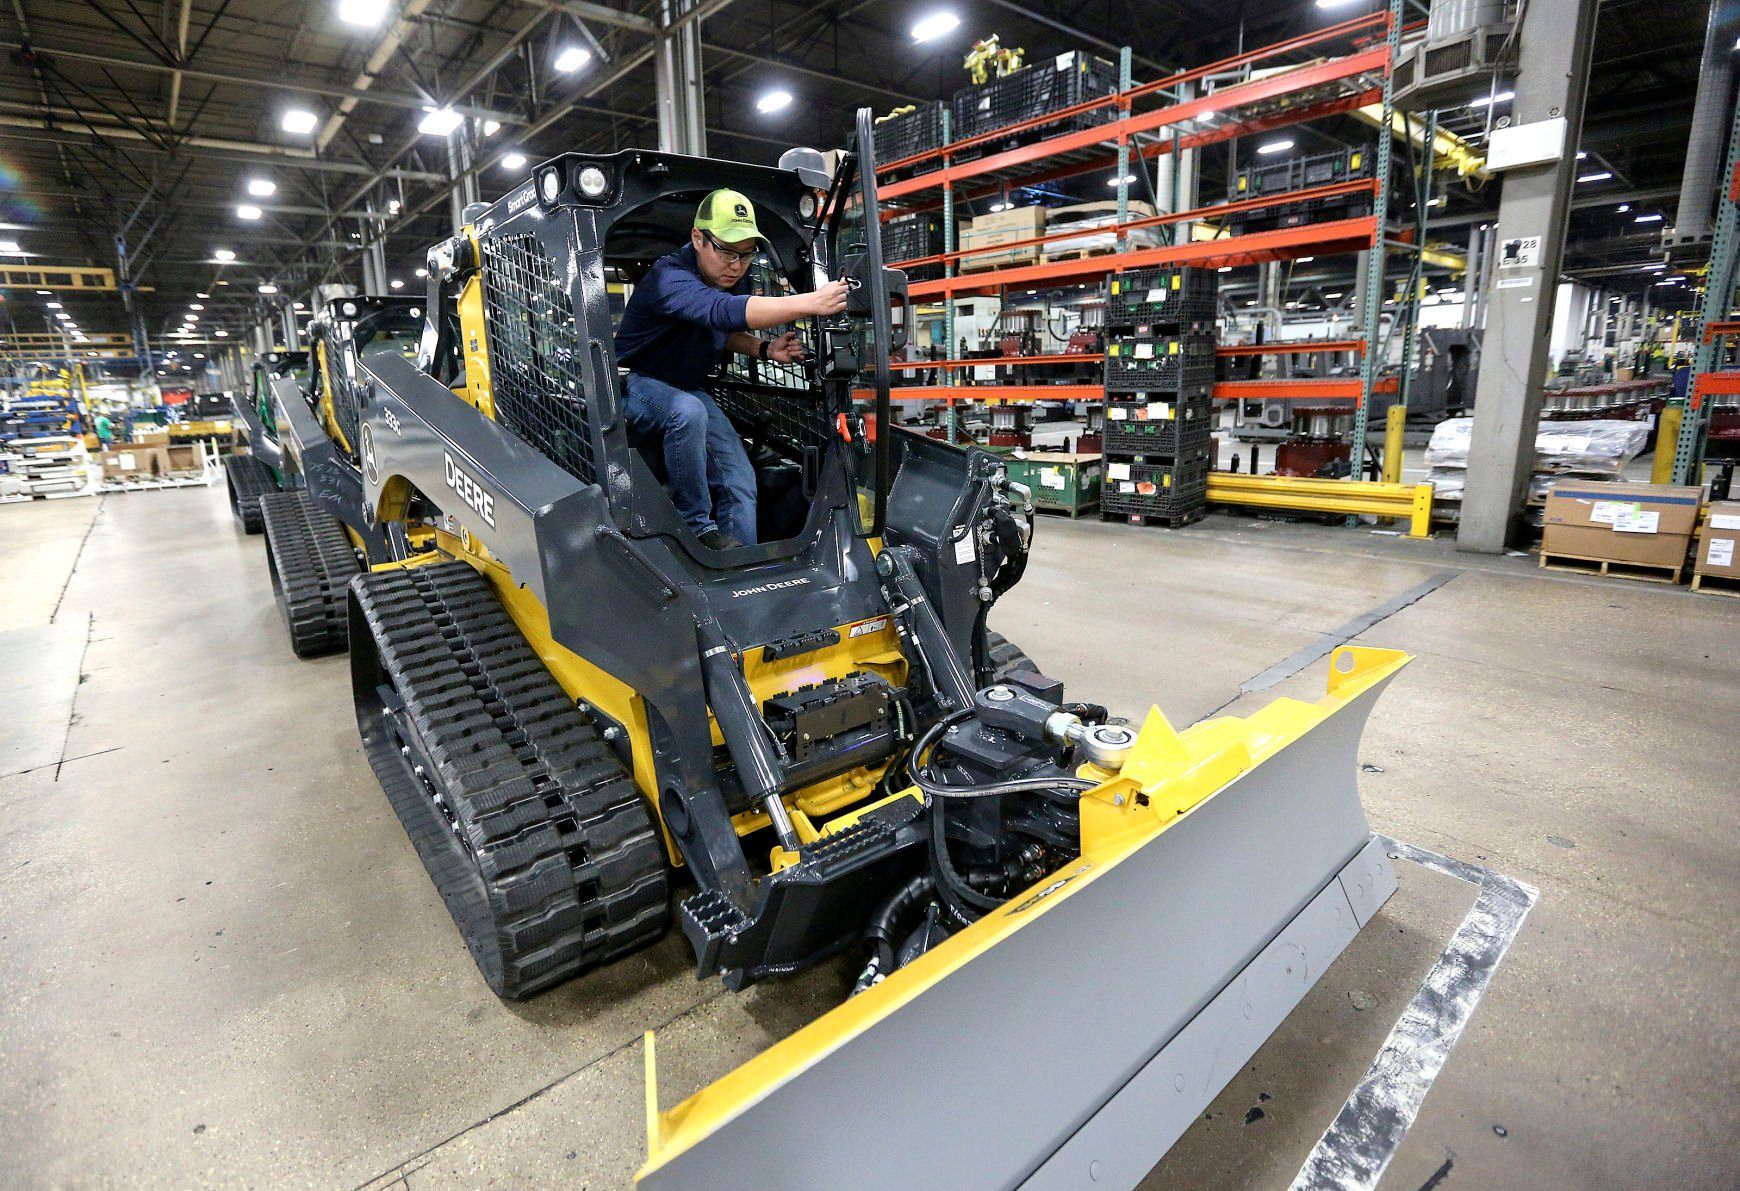 John Deere Dubuque Works employee Blake Meisner, repair coordinator and calibrator on skid-steer production line, gets into the companies newest skid-steer that features state of the art SmartGrade technology.    PHOTO CREDIT: Dave Kettering